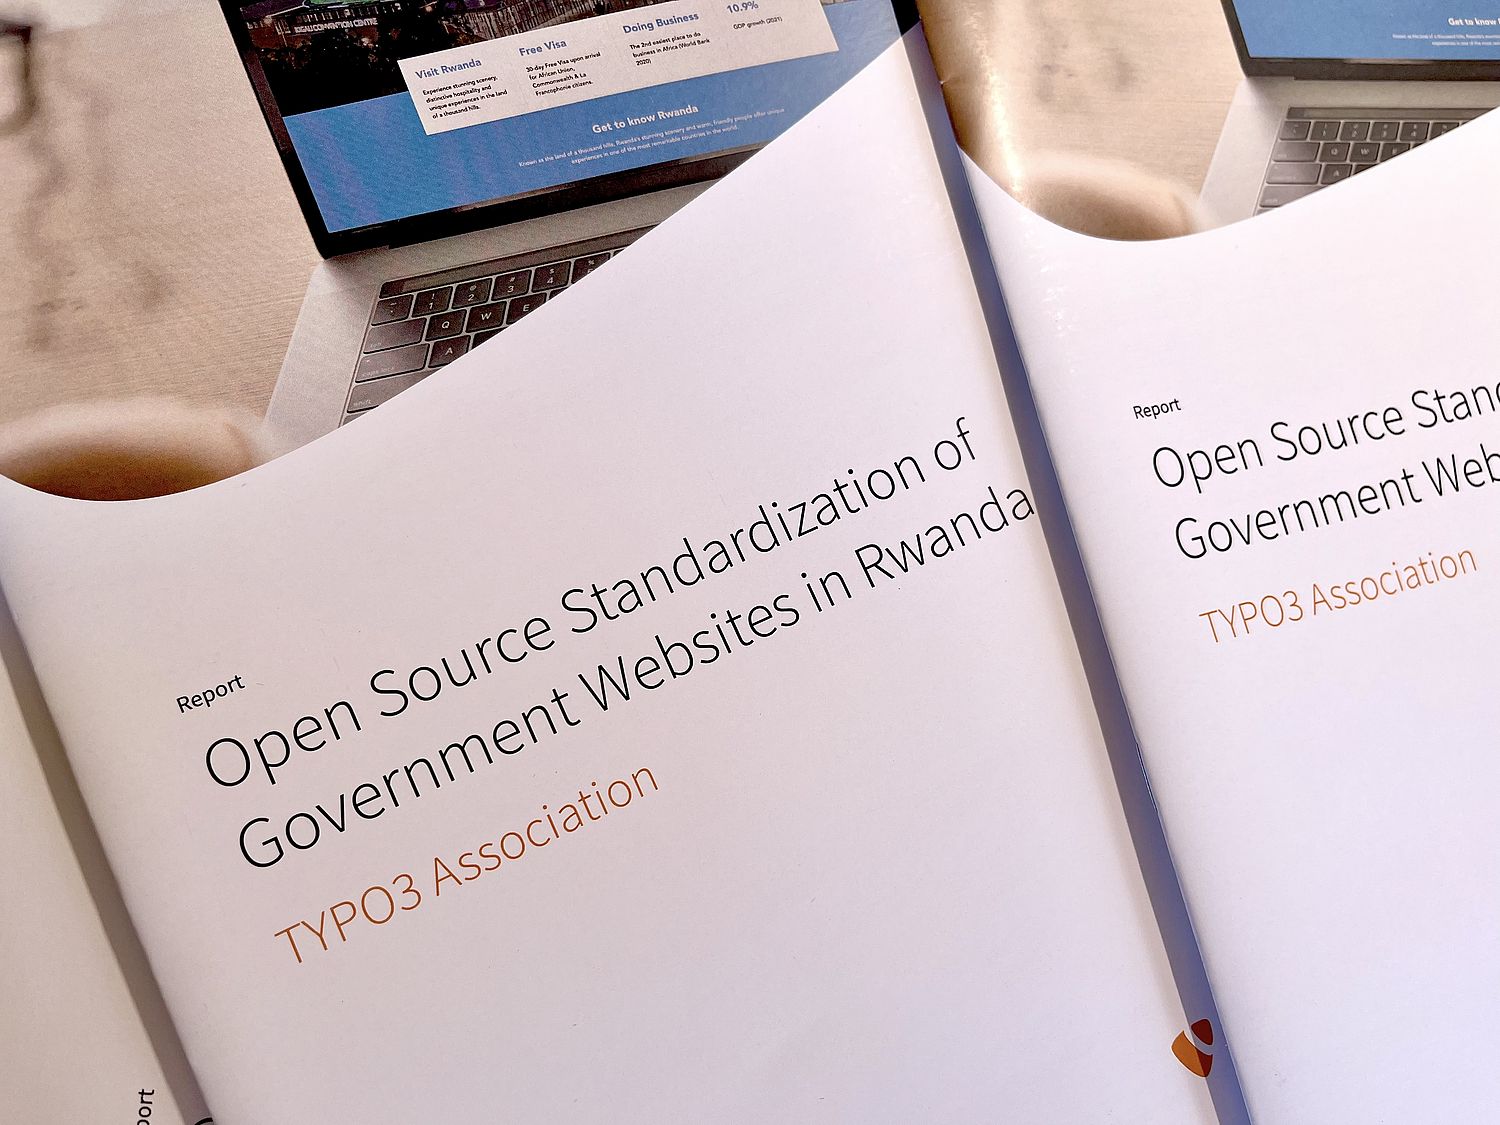 Photo of printed reports on "Open Source Standardization of Government Websites in Rwanda".